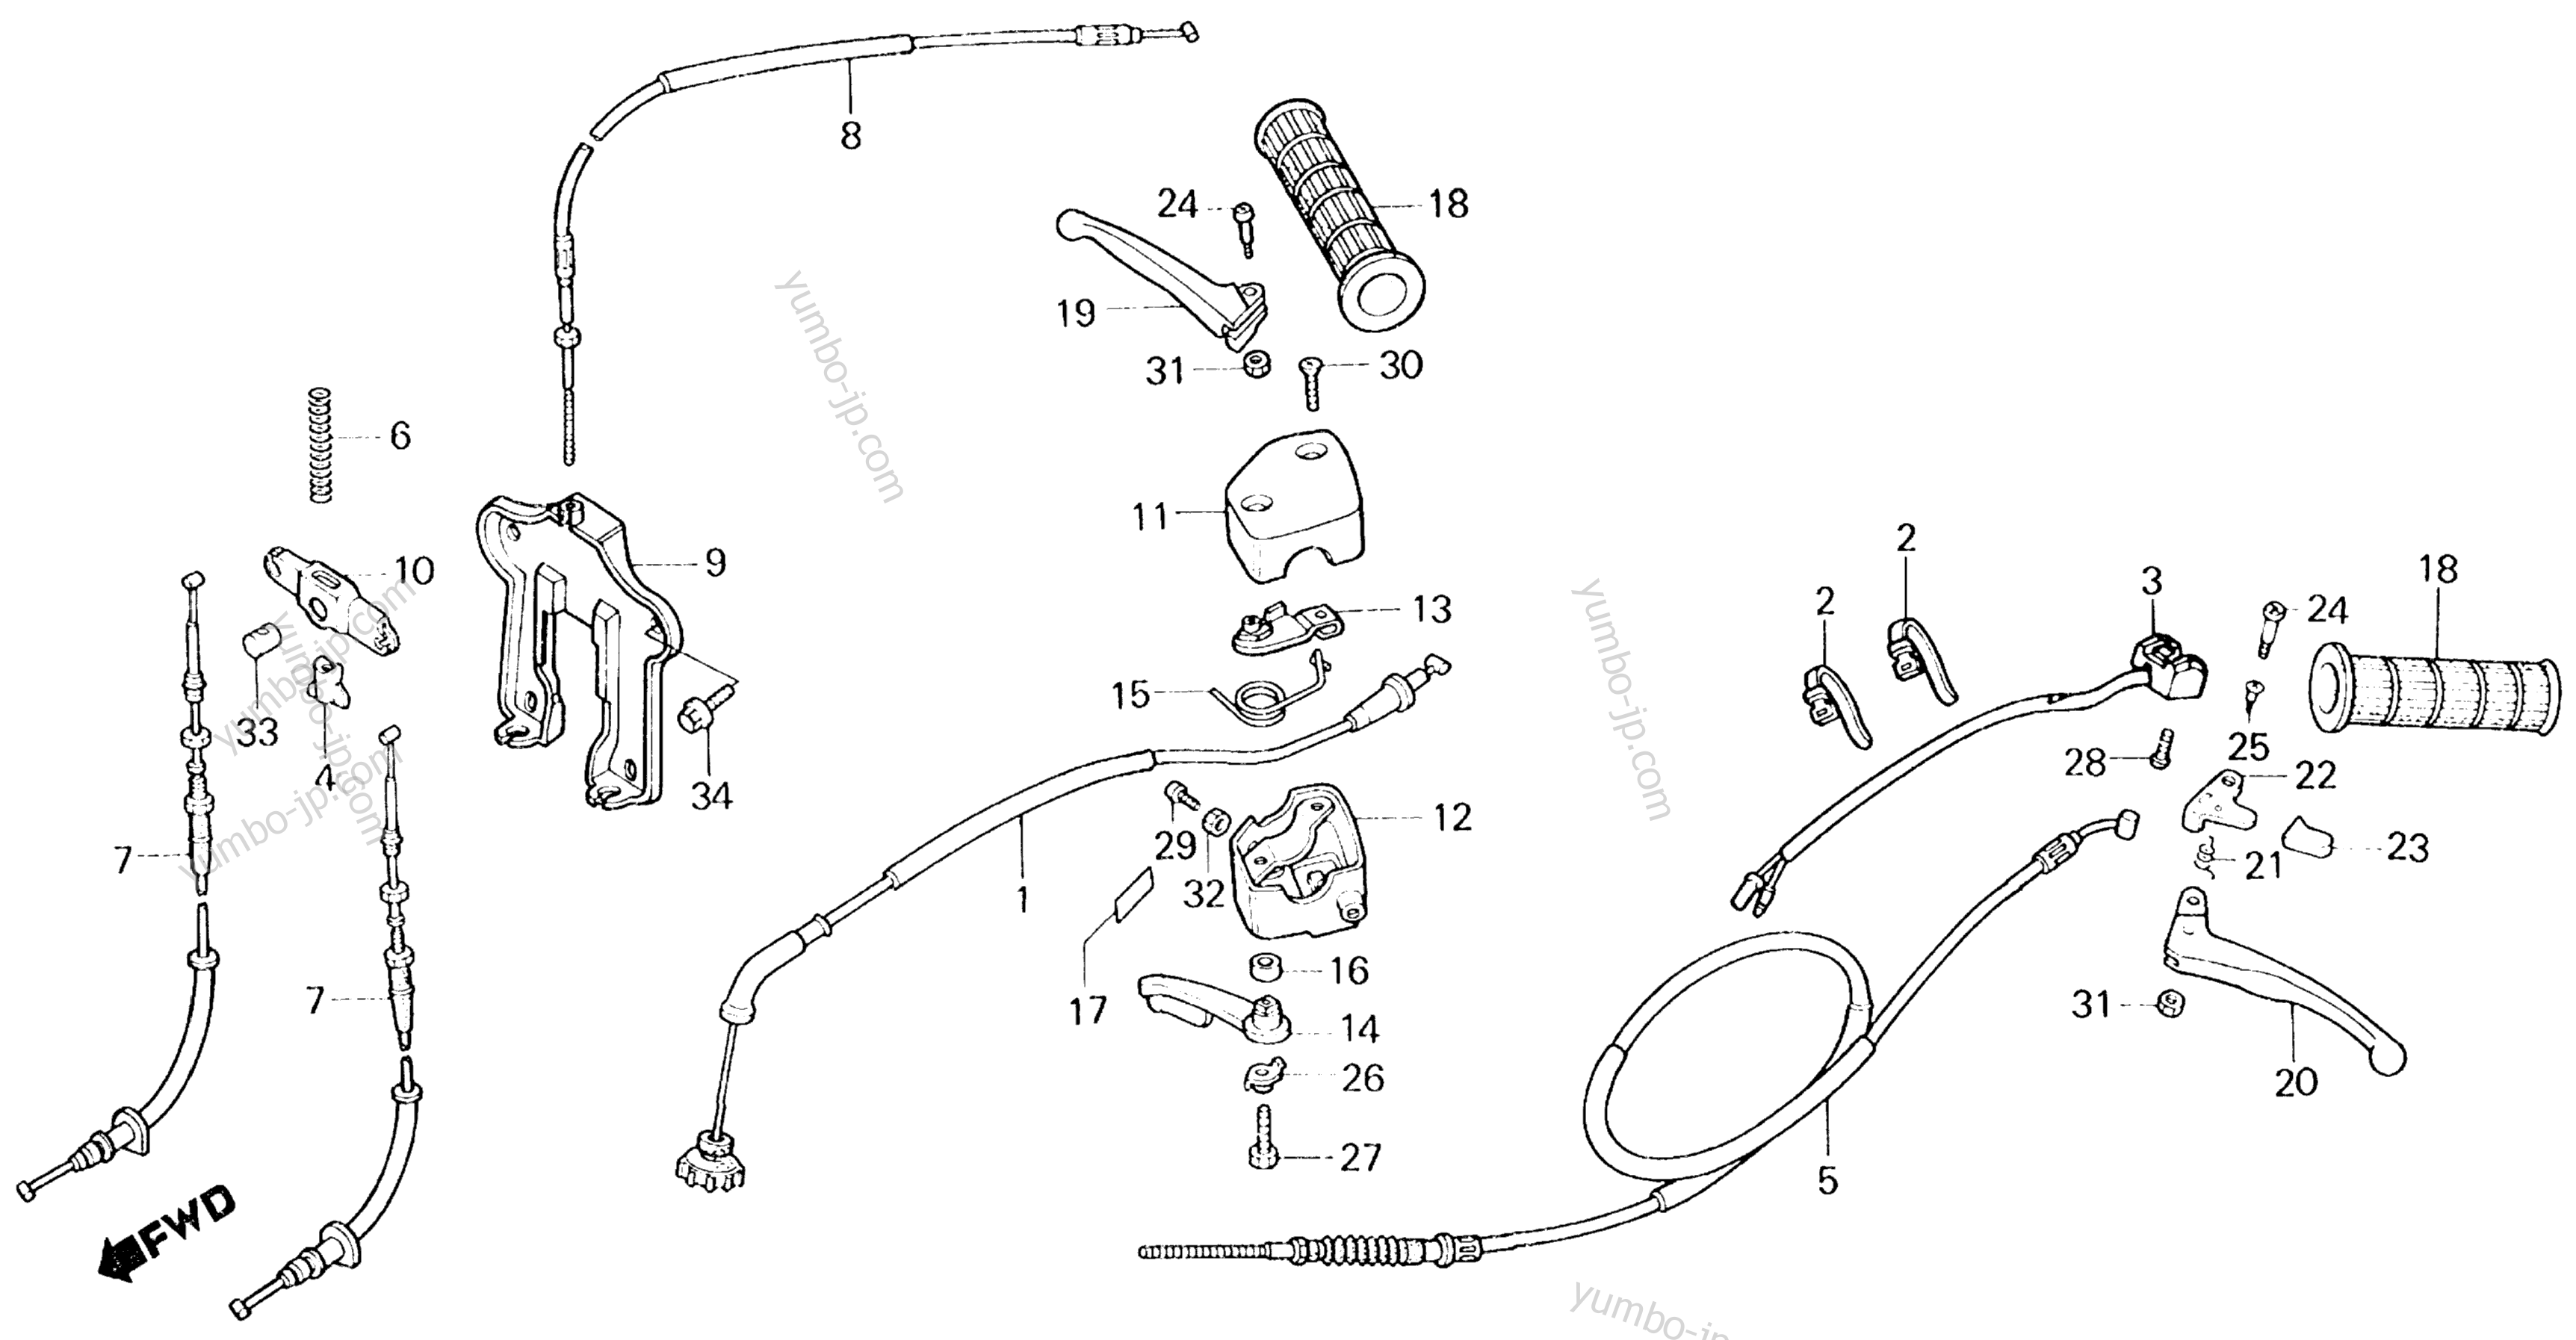 HANDLE LEVER / SWITCH / CABLE for ATVs HONDA TRX70 A 1986 year